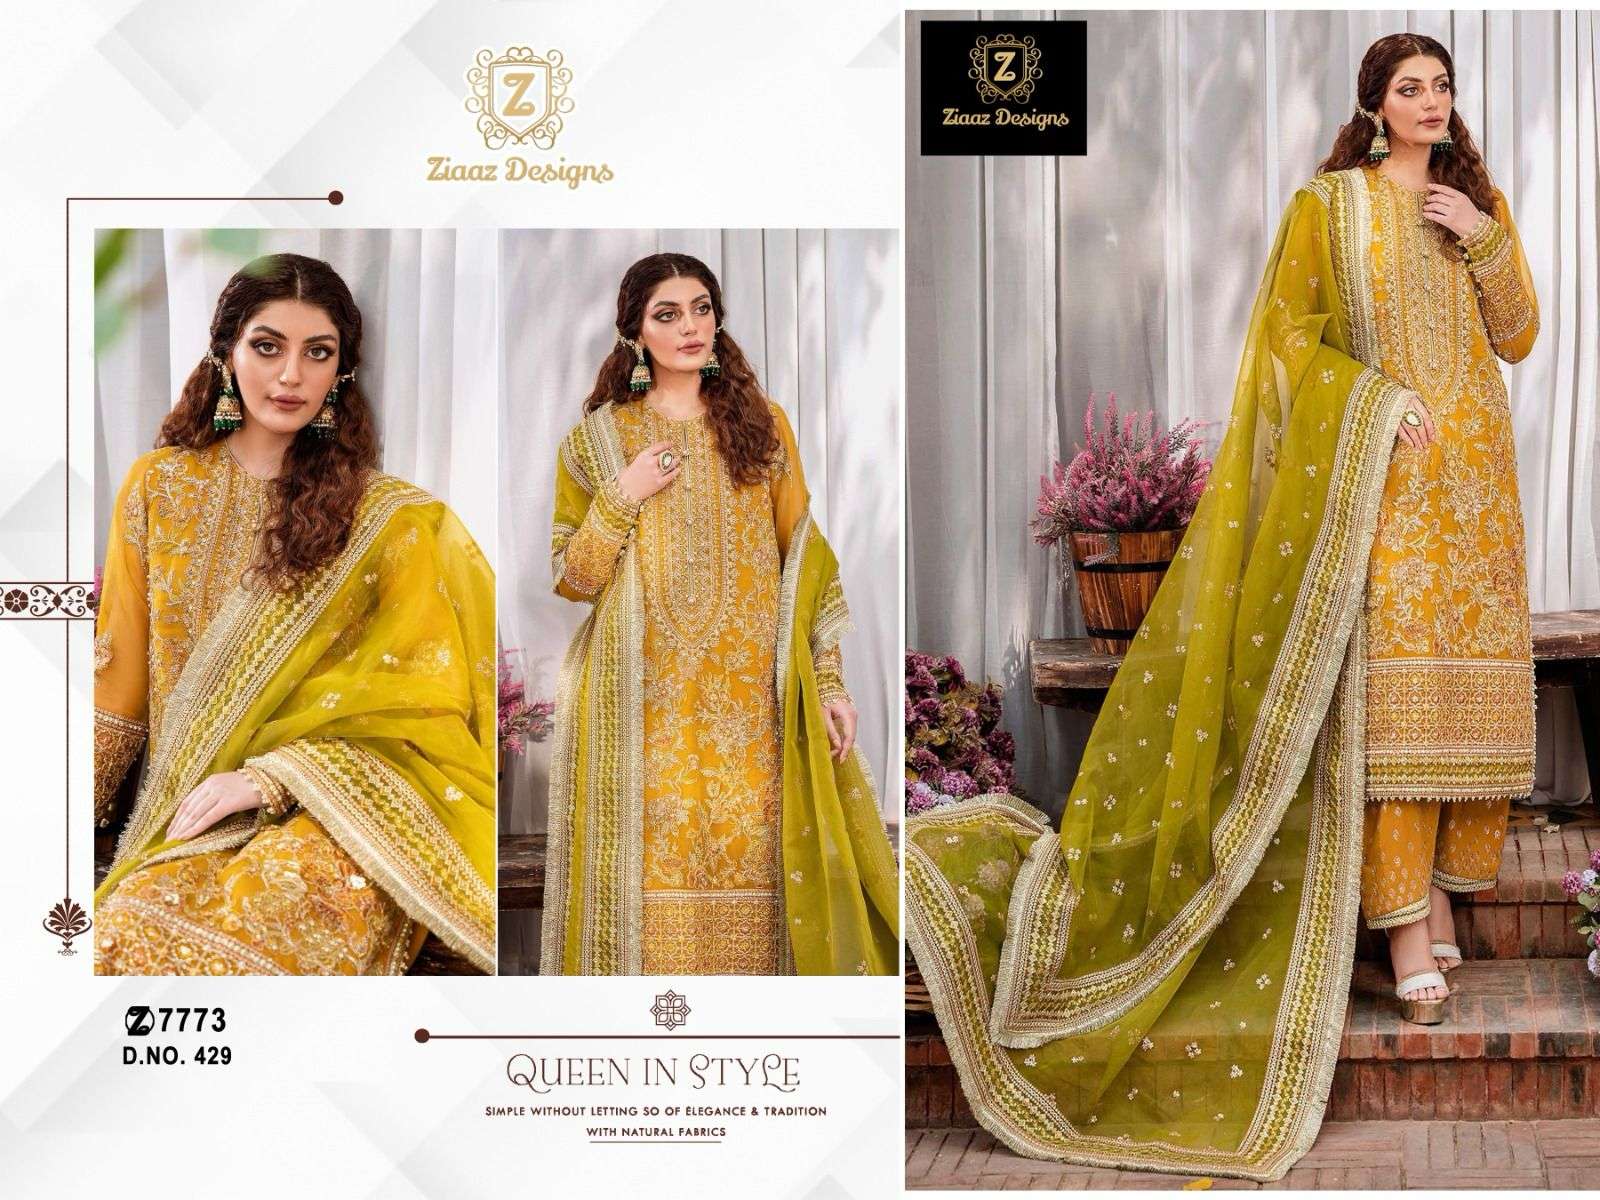 ZIAAZ 429 SEMI STICH GEORGETTE WITH EMBROIDERY WORK EID FESTIVAL SPECIAL SUITS